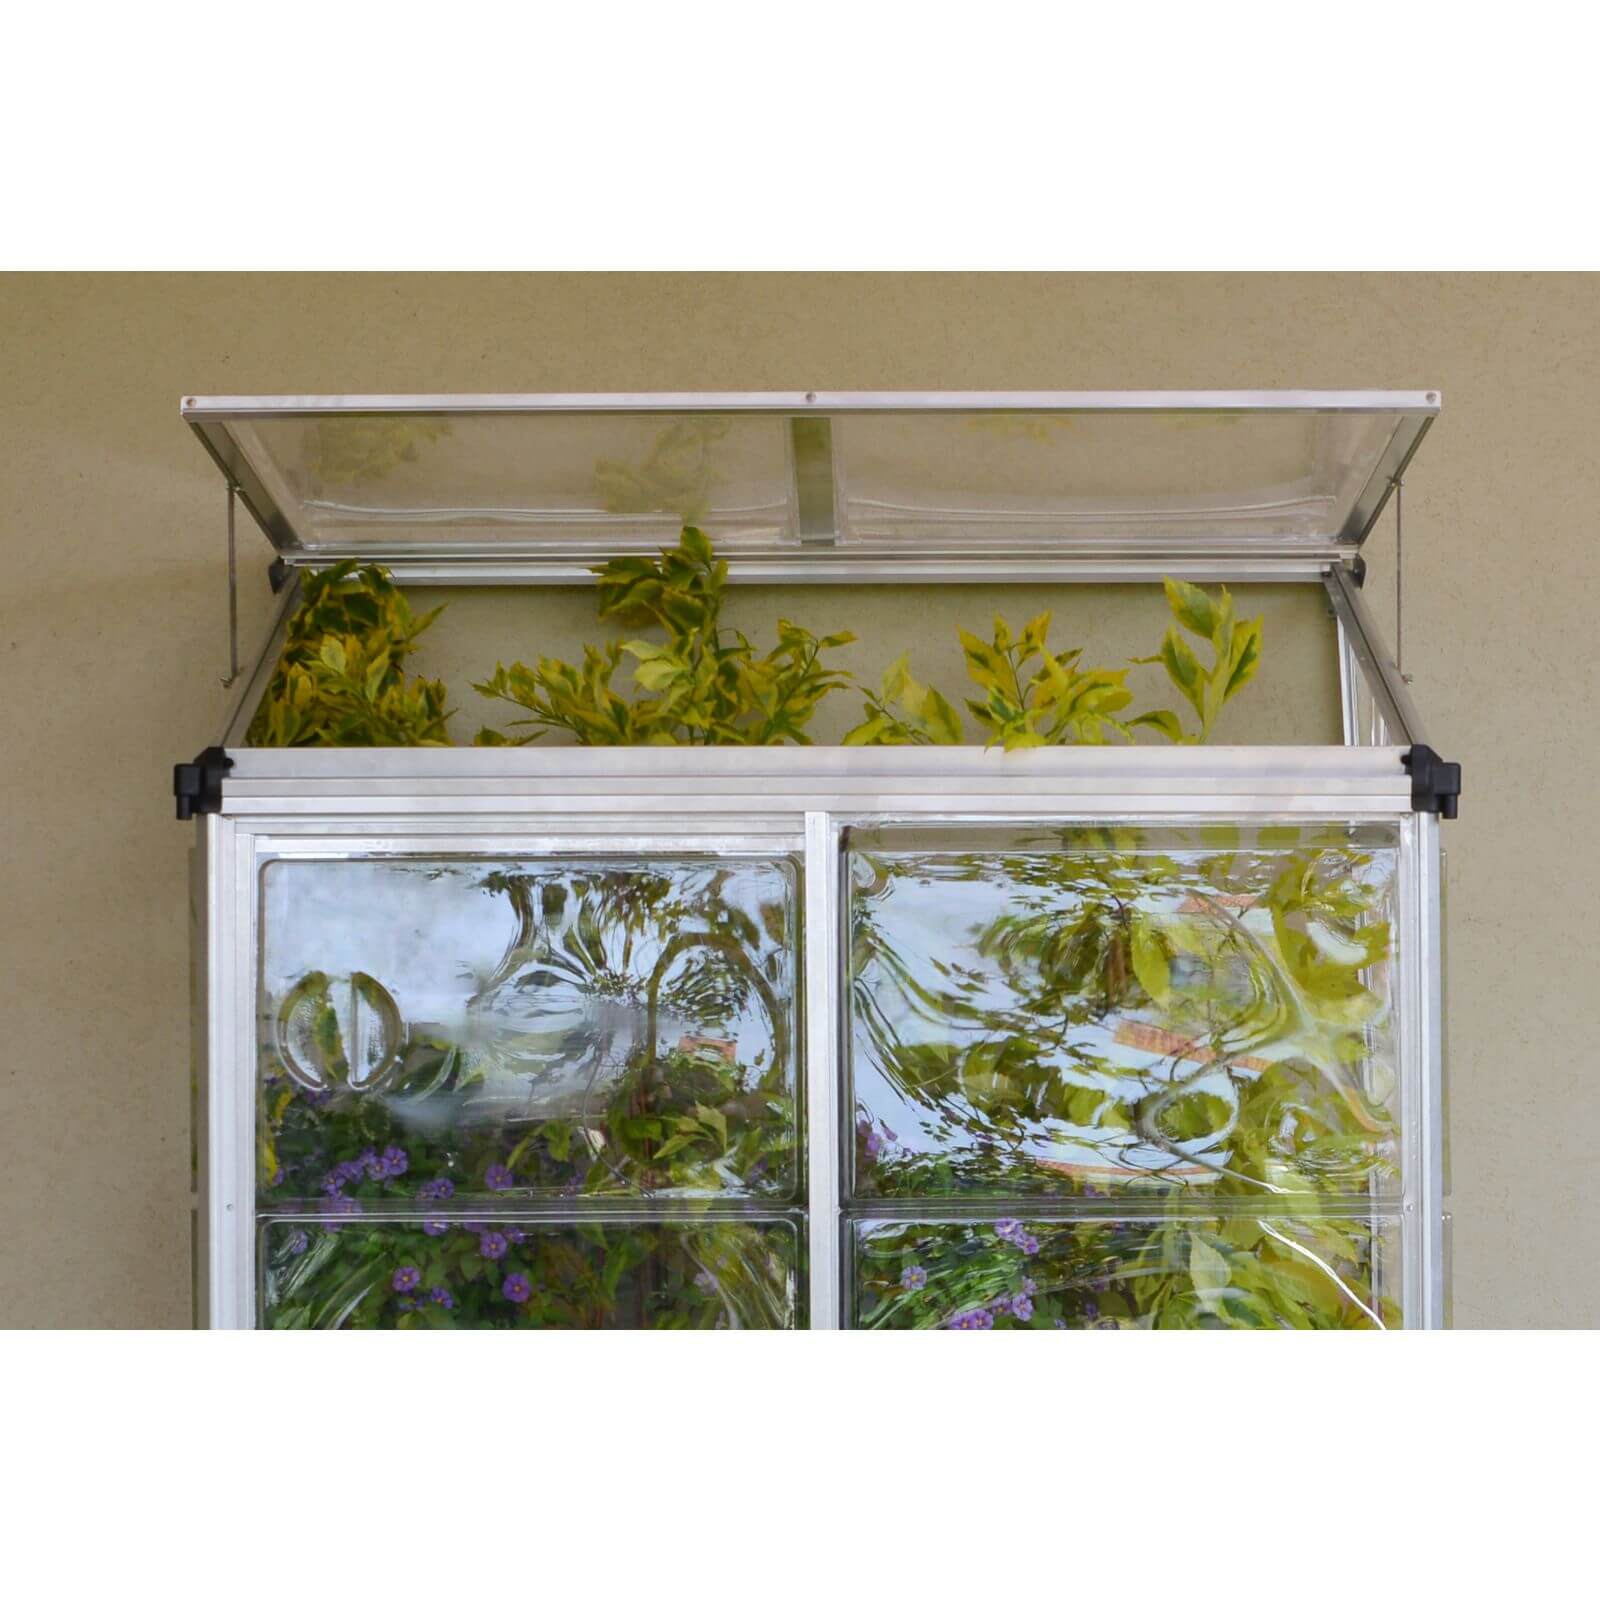 Palram - Canopia Lean To Grow House 4X2 Silver Clear